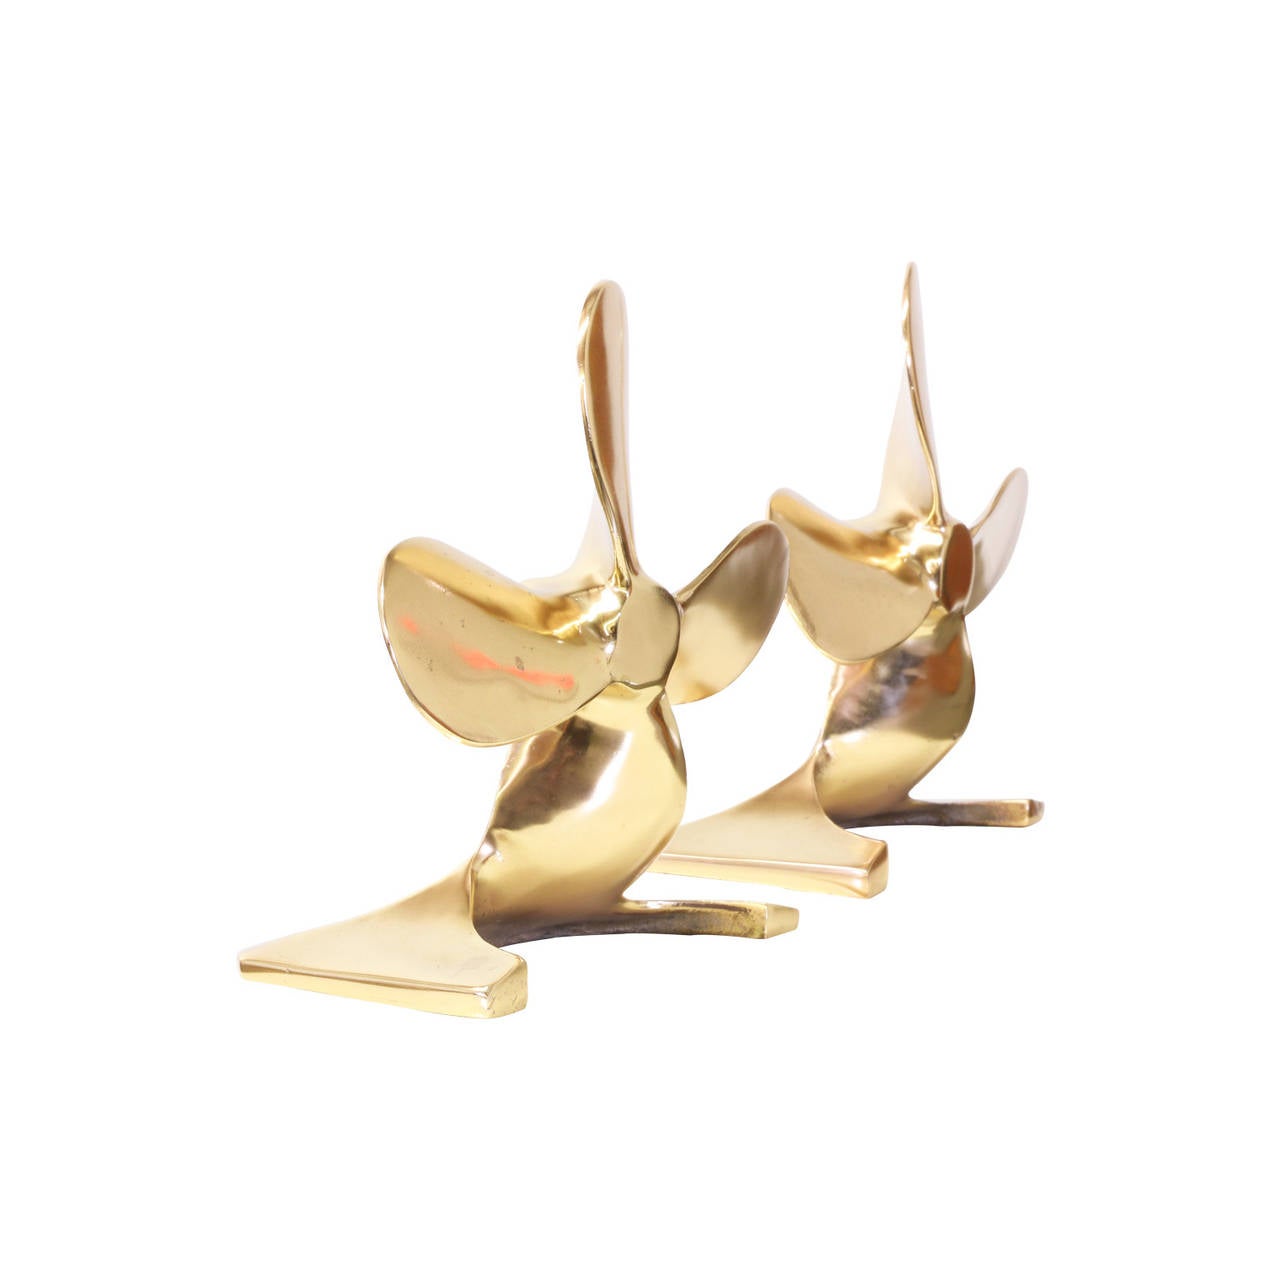 Polished Midcentury Brass Propeller Bookends